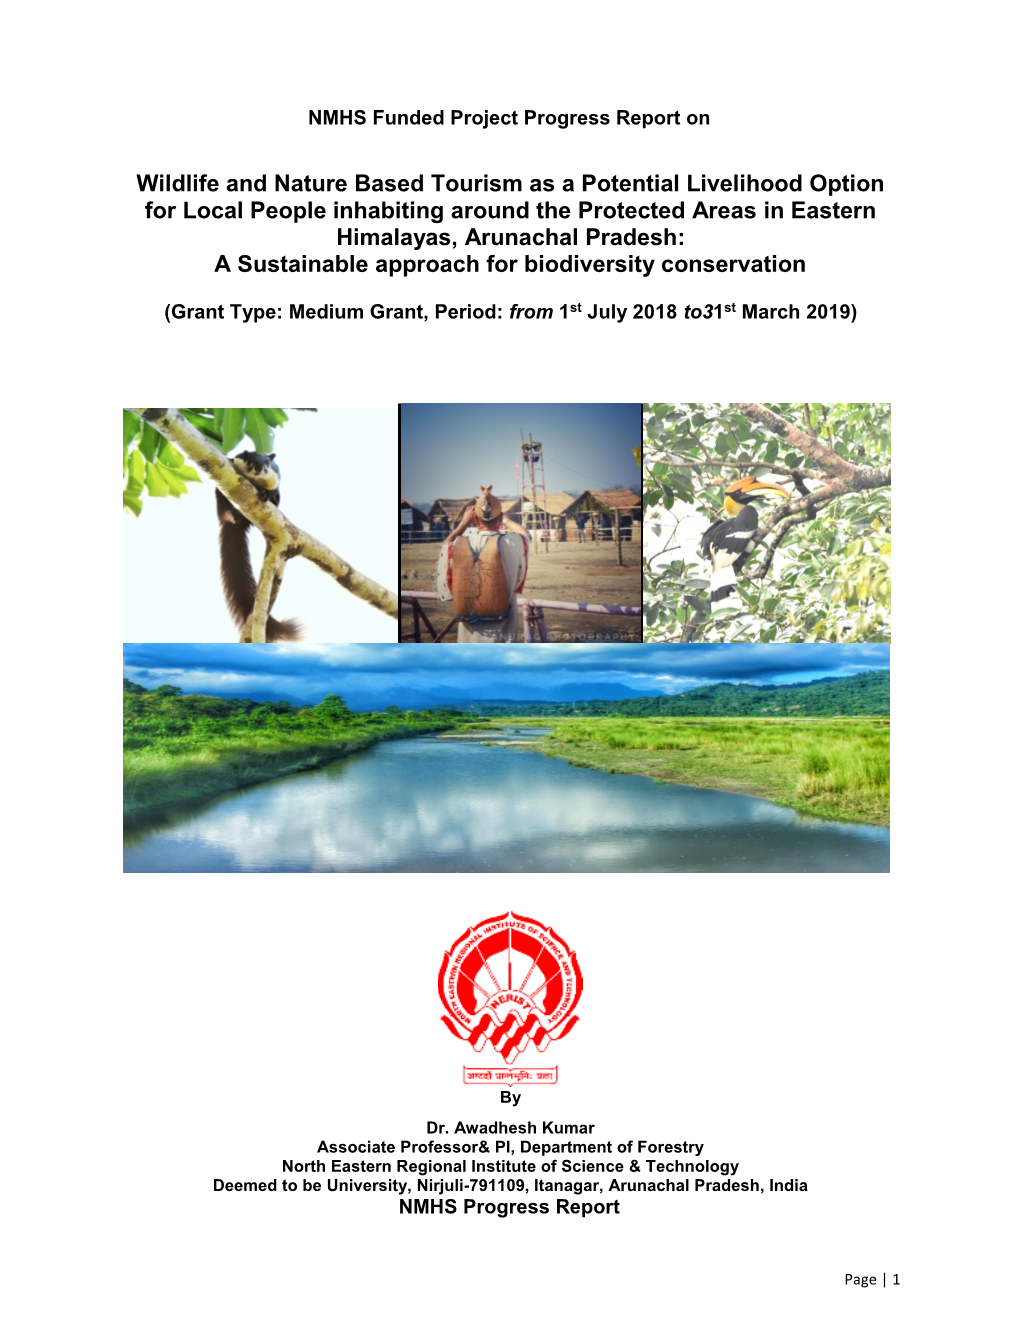 Wildlife and Nature Based Tourism As a Potential Livelihood Option For